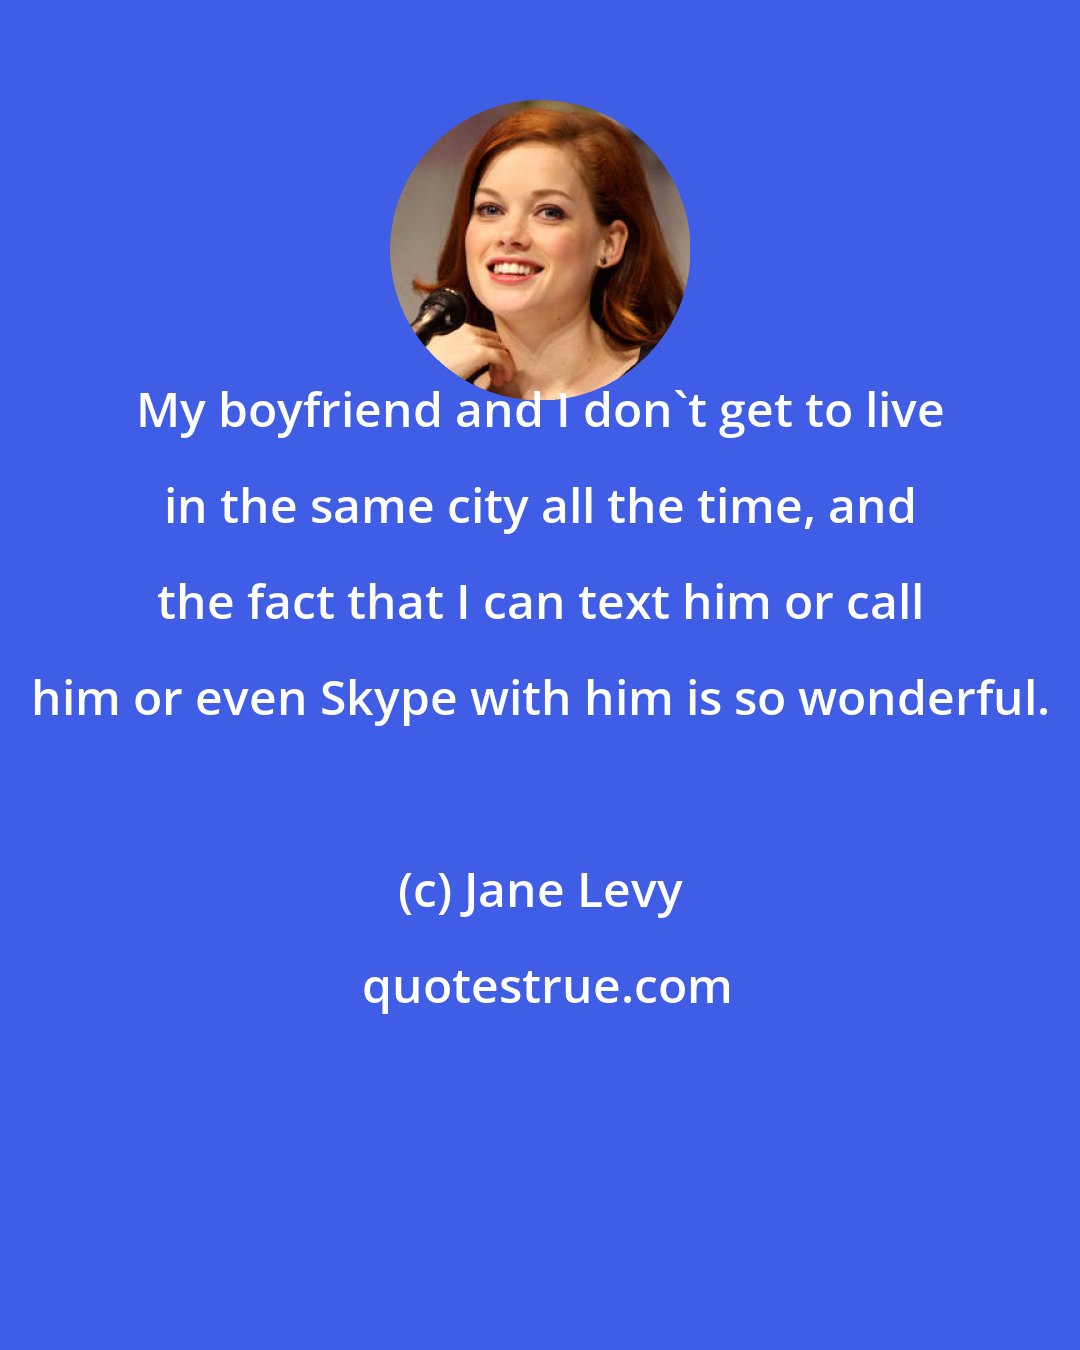 Jane Levy: My boyfriend and I don't get to live in the same city all the time, and the fact that I can text him or call him or even Skype with him is so wonderful.